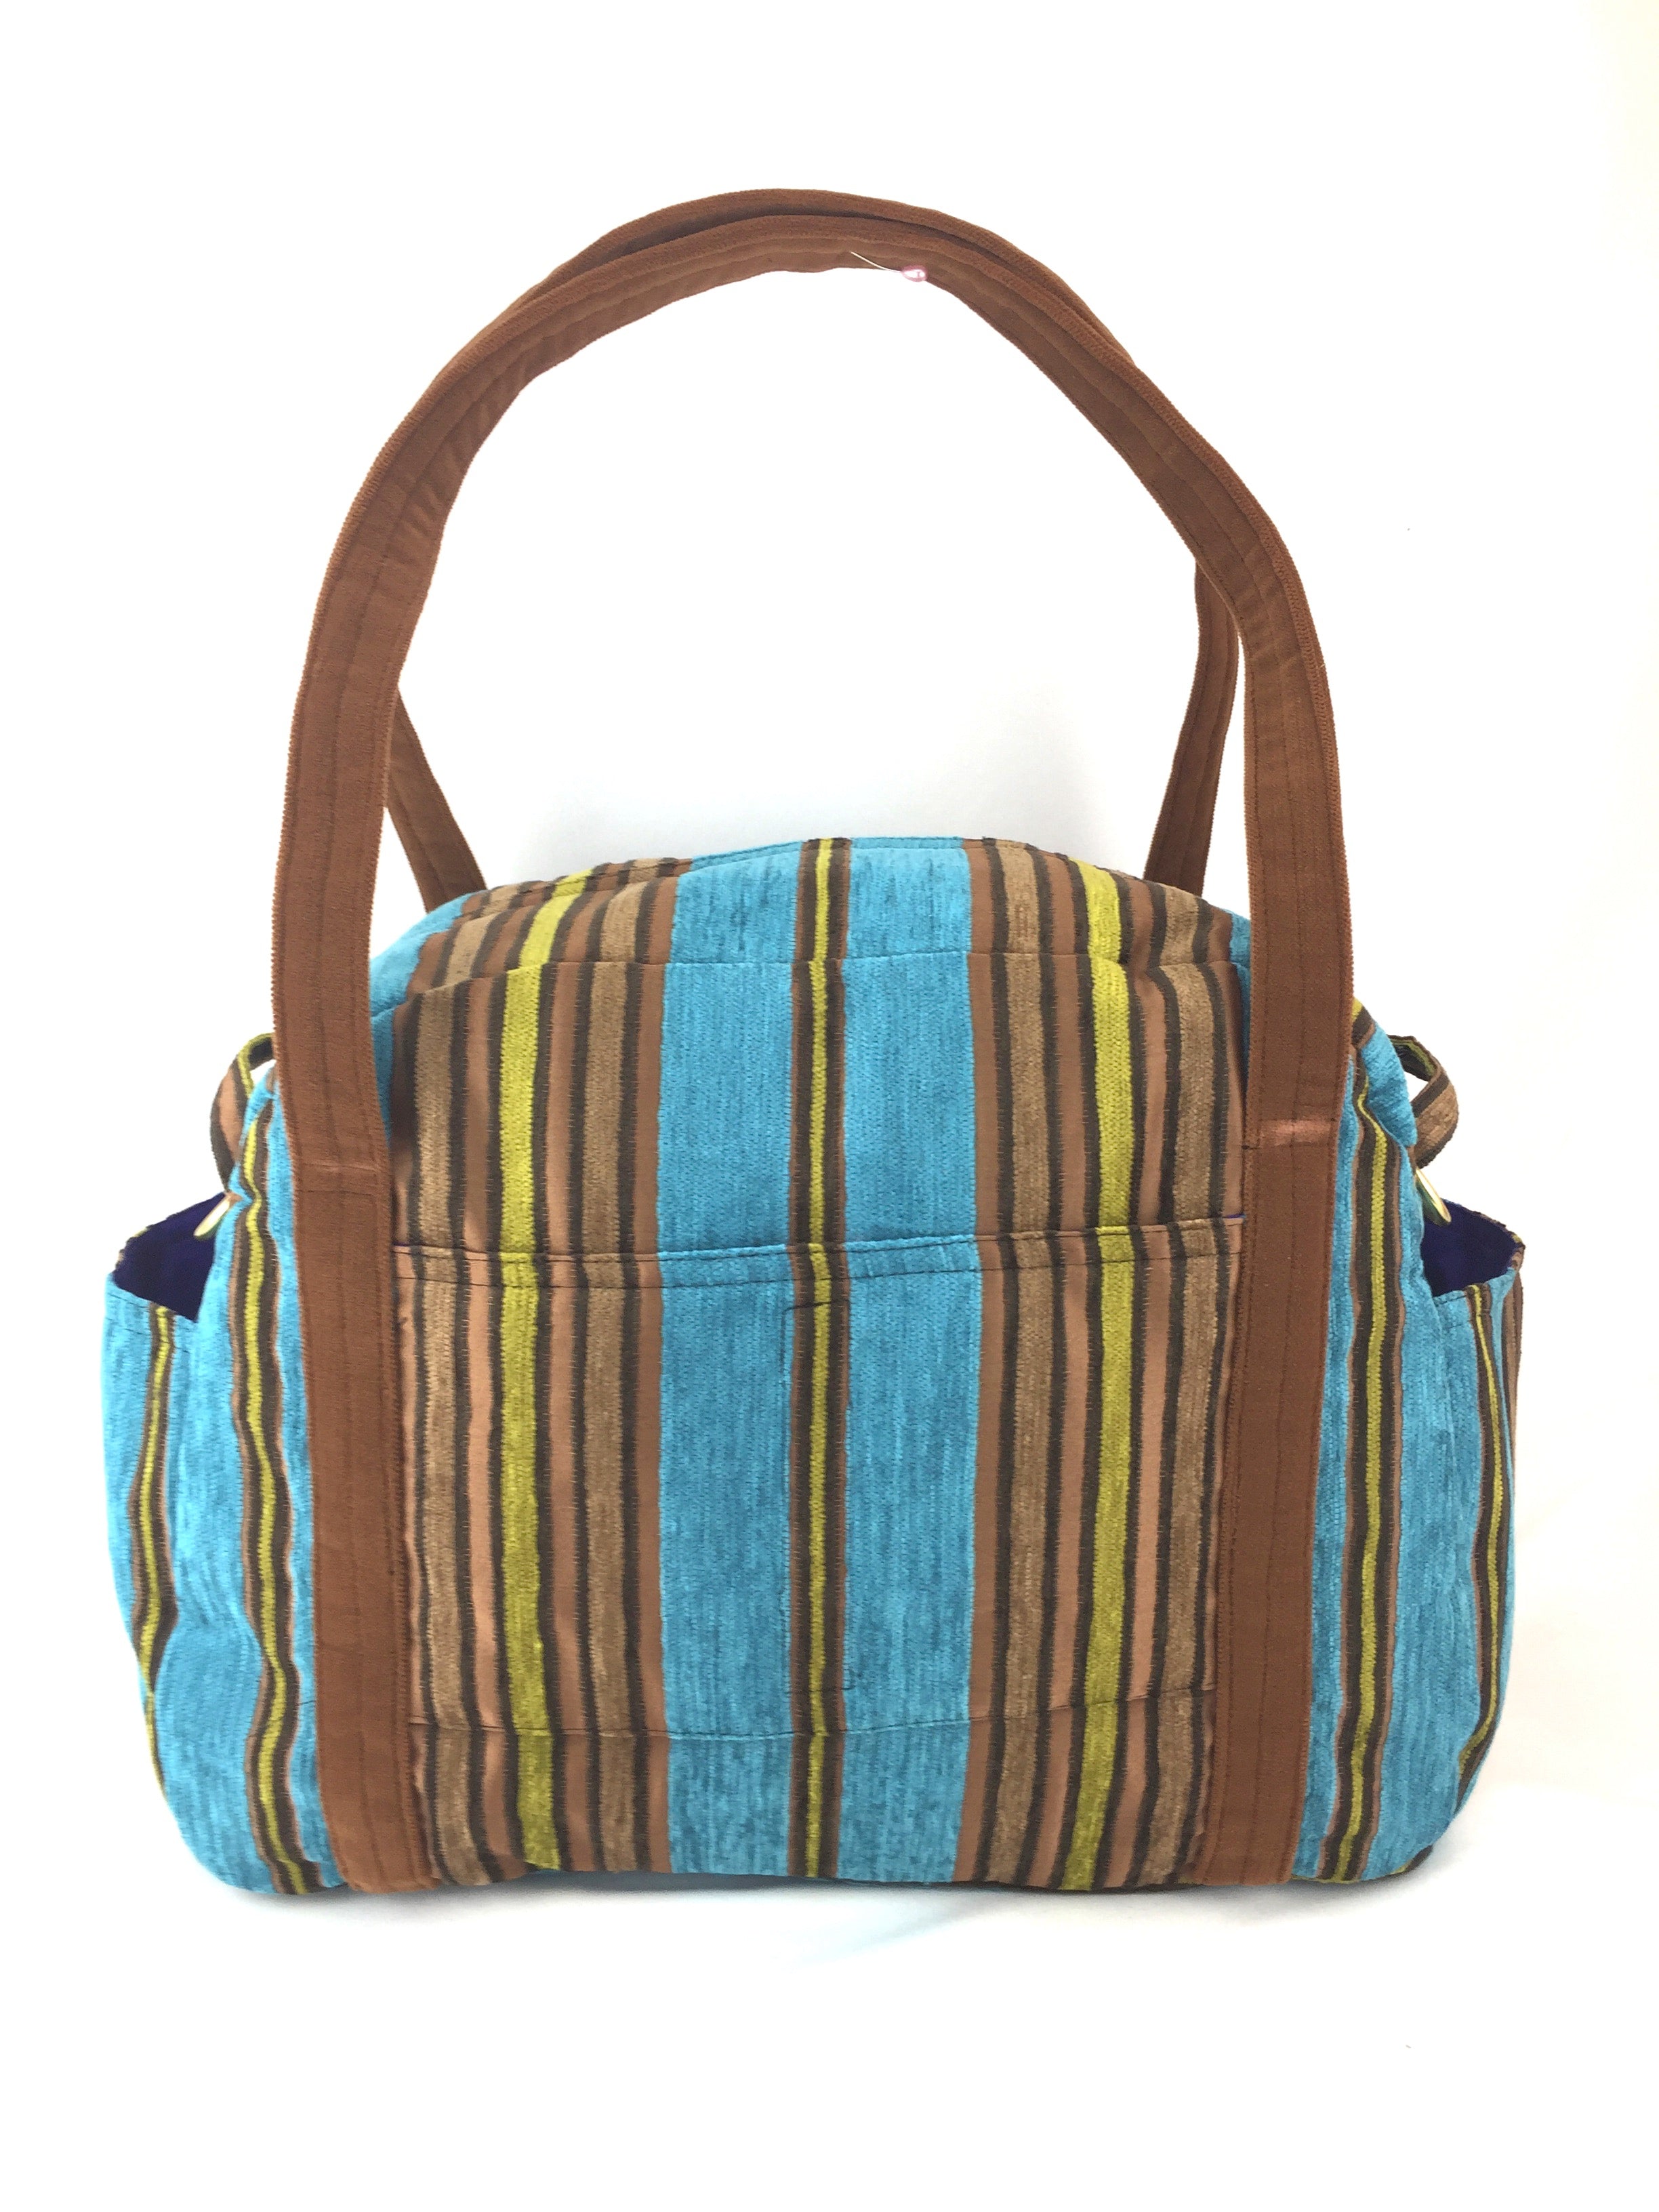 Turquoise & Wood Holly Carry-On Bag